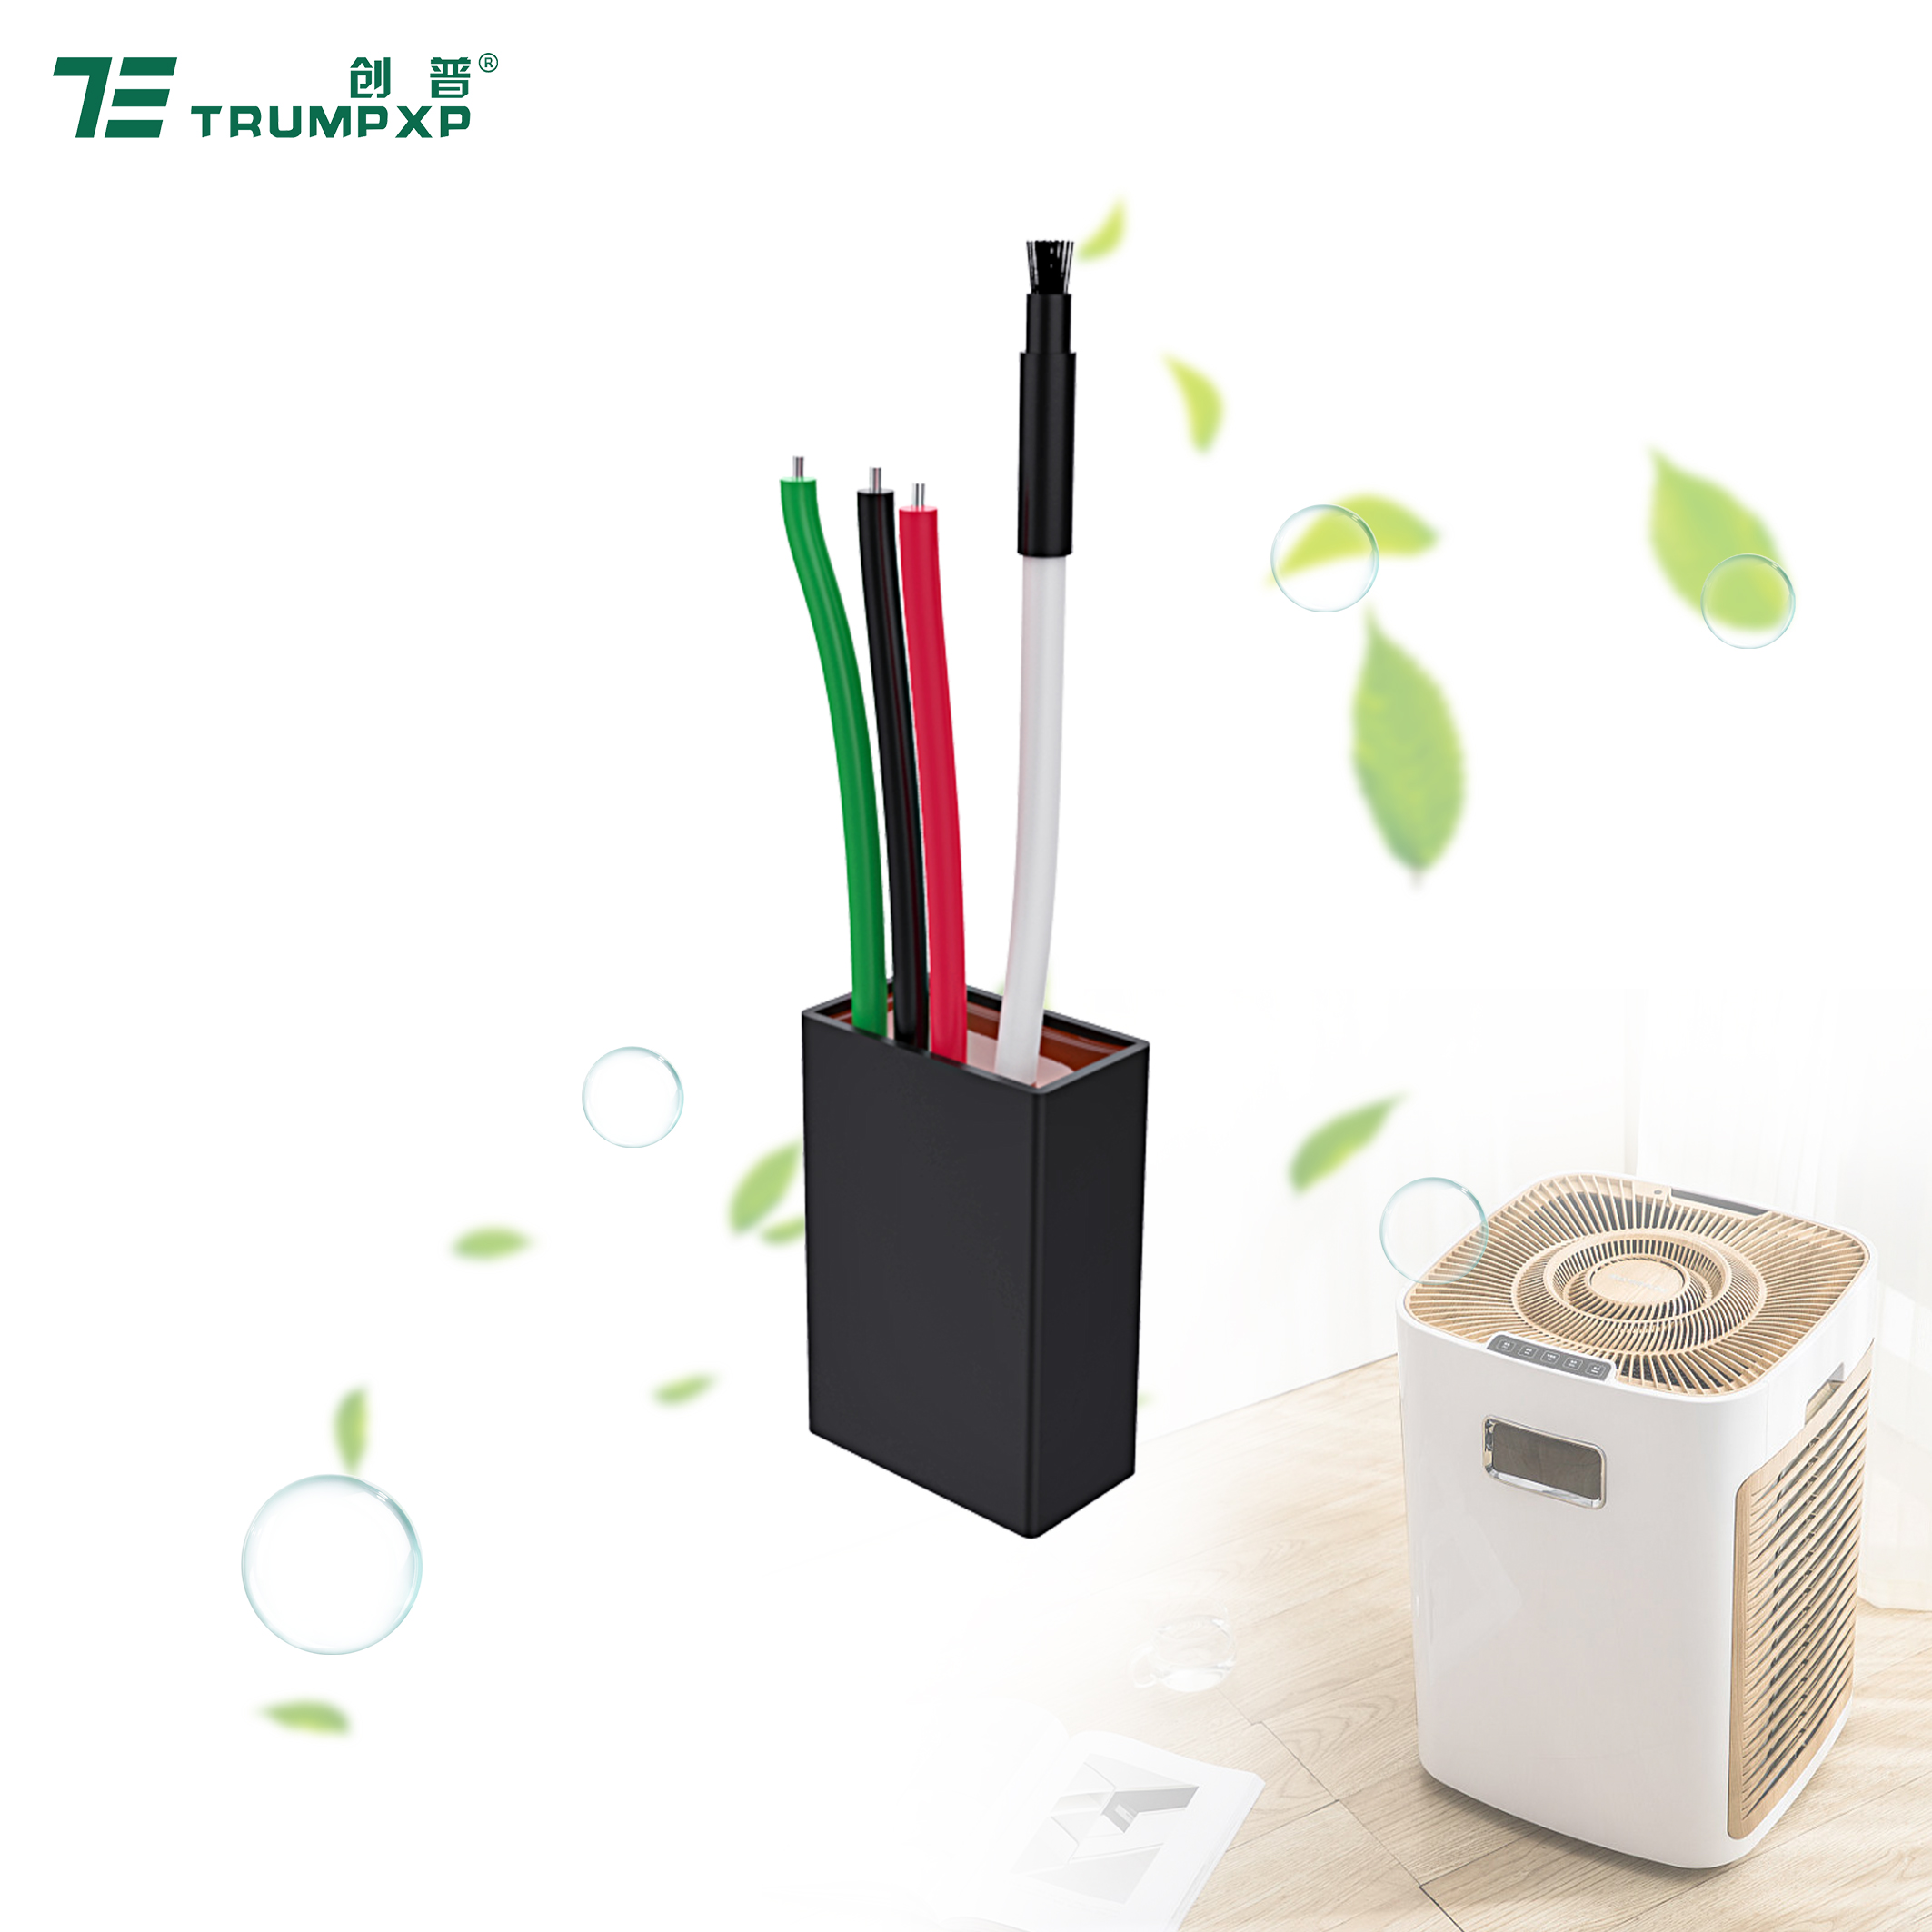 TFB-Y147for air conditioner and refrigerator